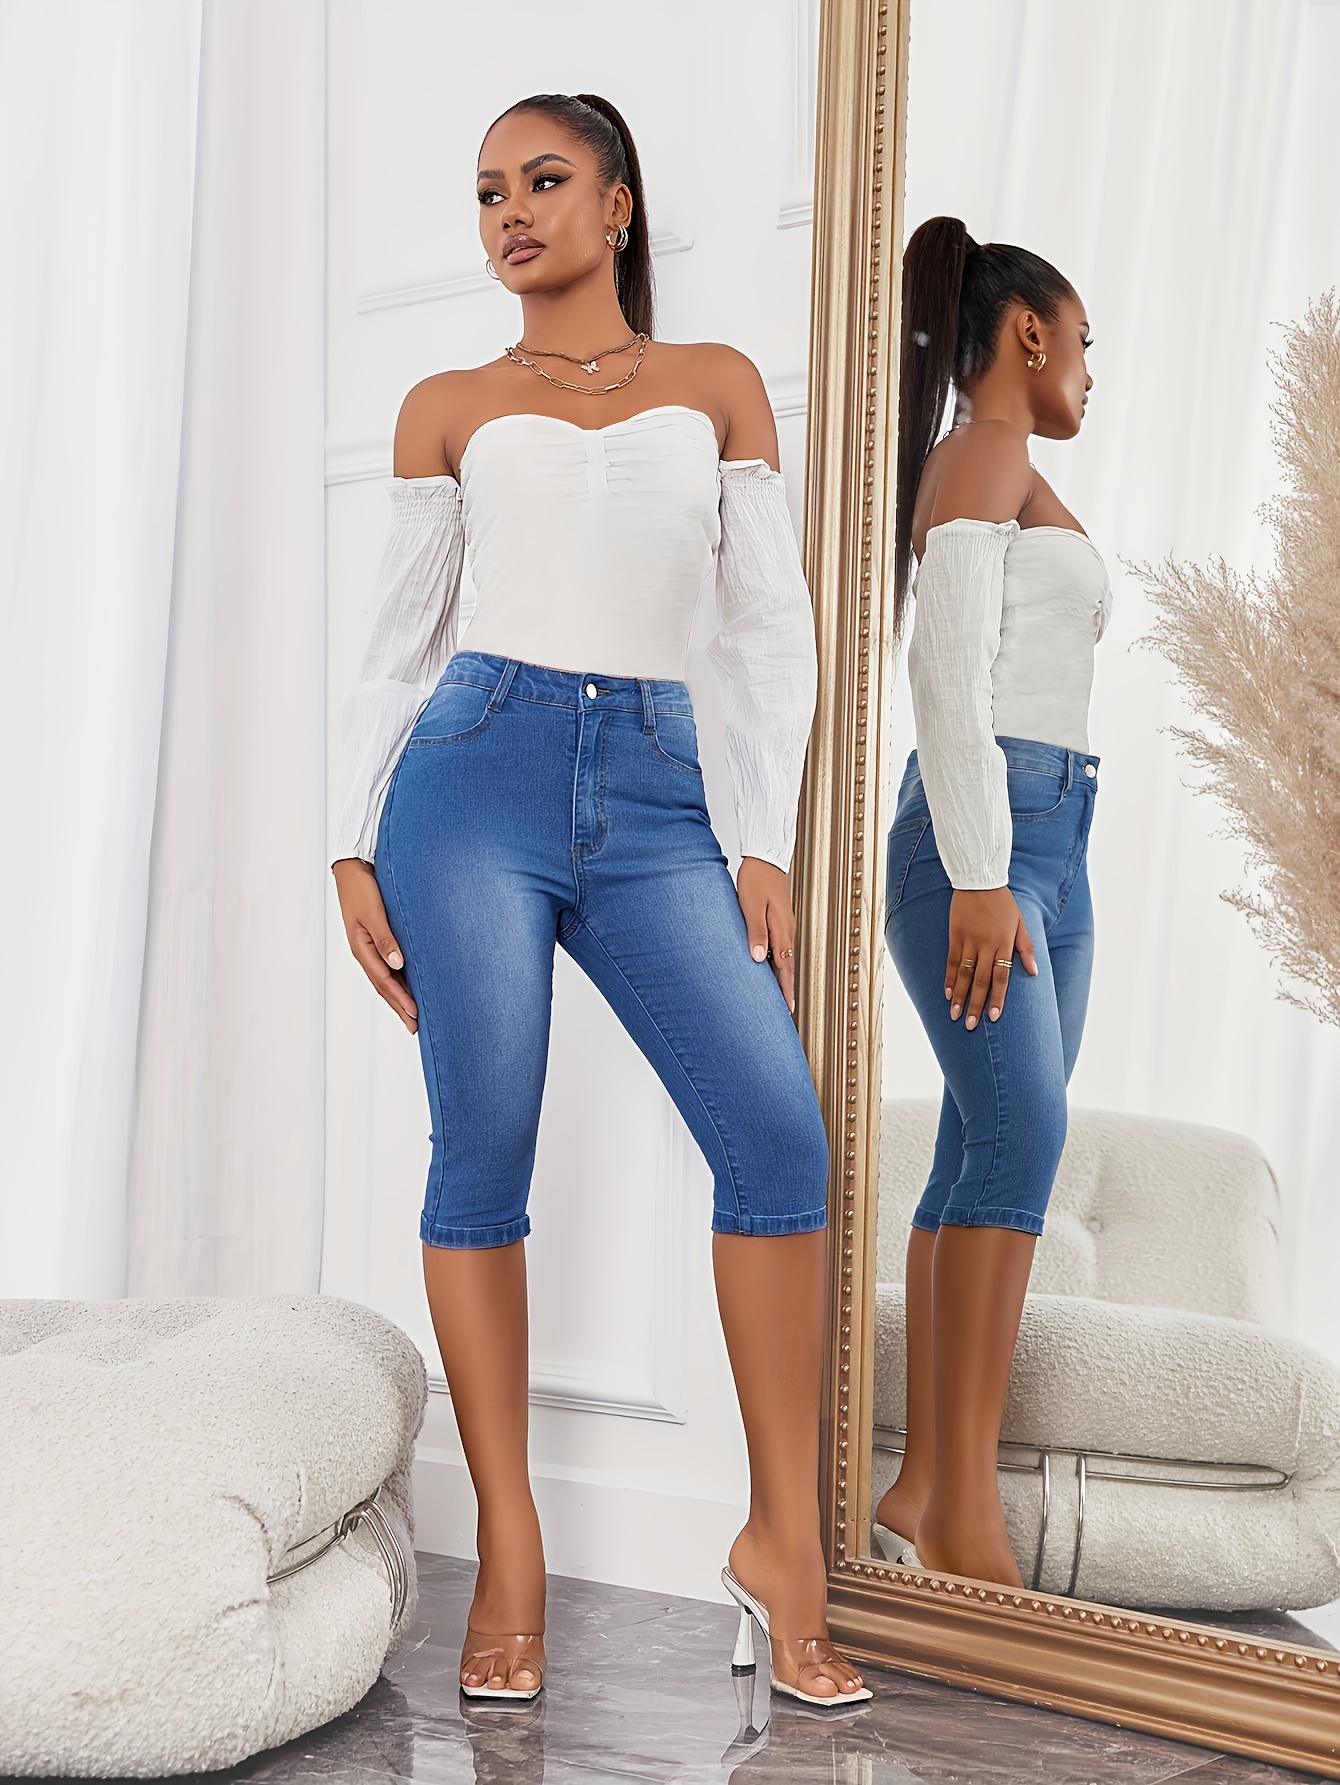 Xysaqa Festival Outfits for Women, Capri Jeans for Women Stretch High  Waisted Distressed Denim Capris Ripped Skinny Cropped Pants 